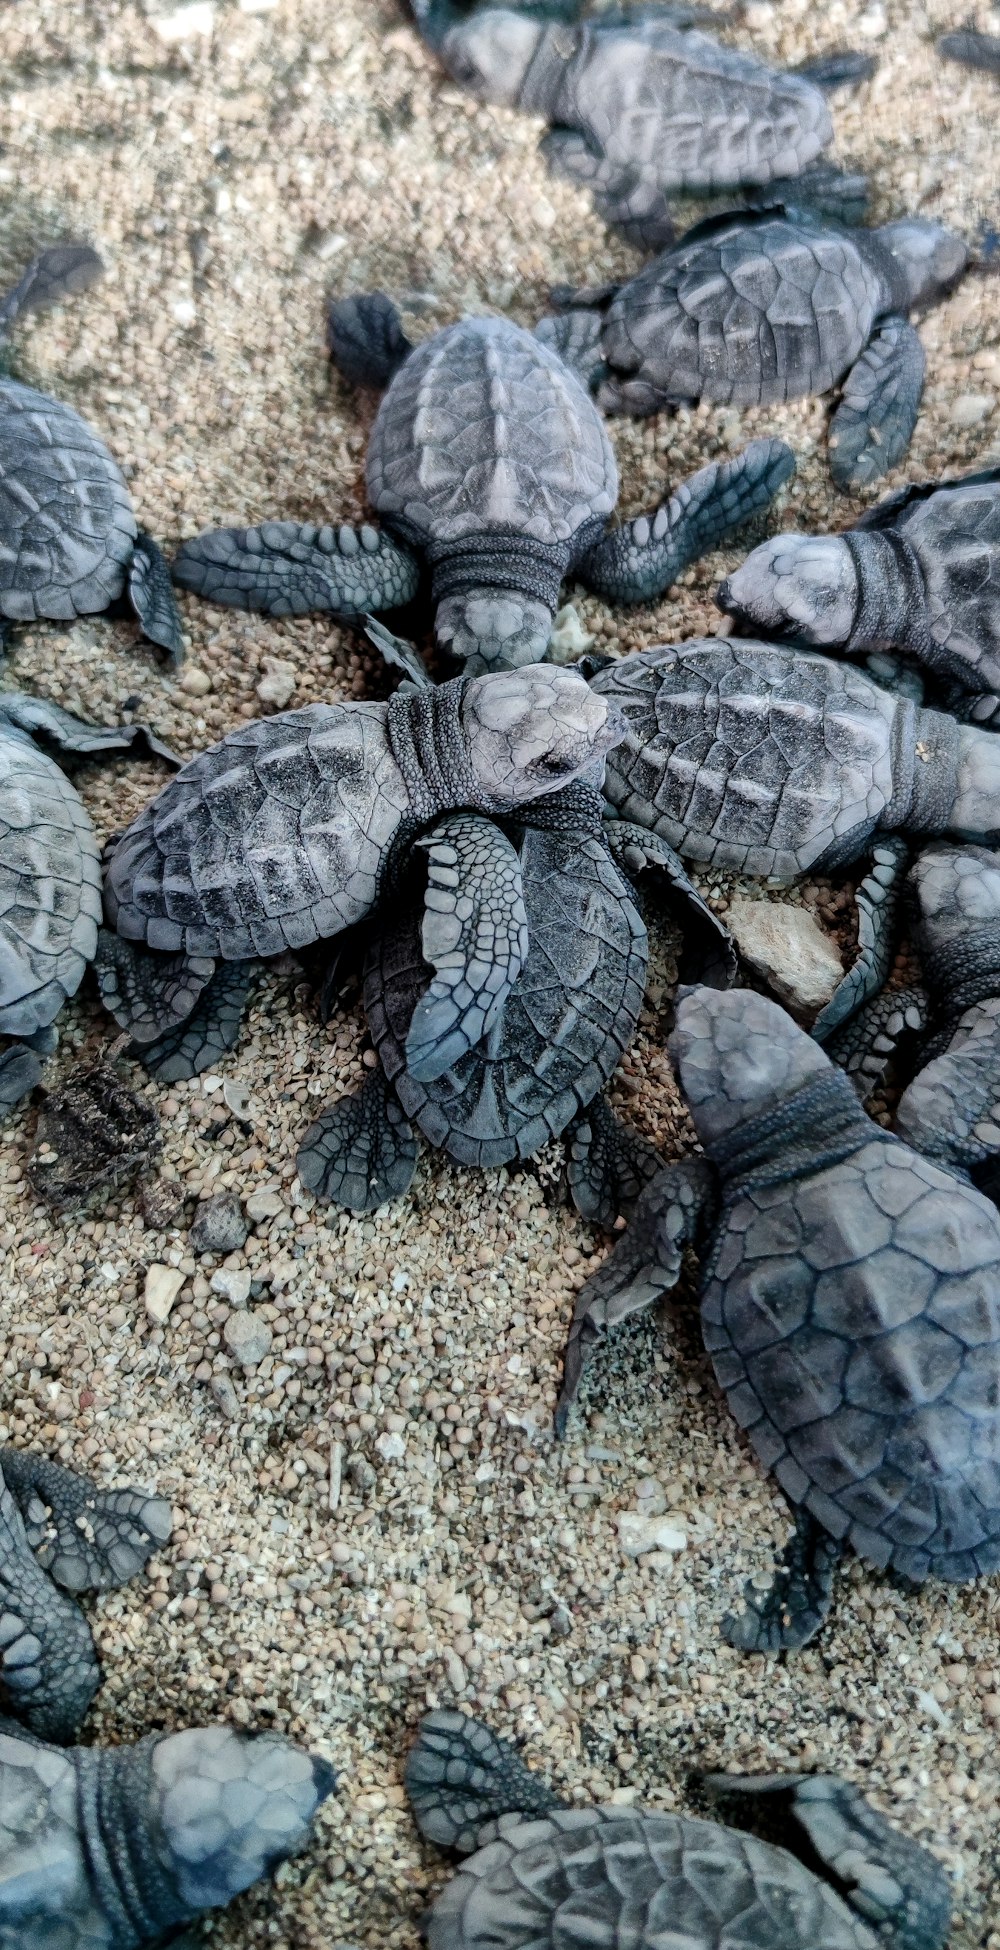 a group of baby turtles crawling on the ground